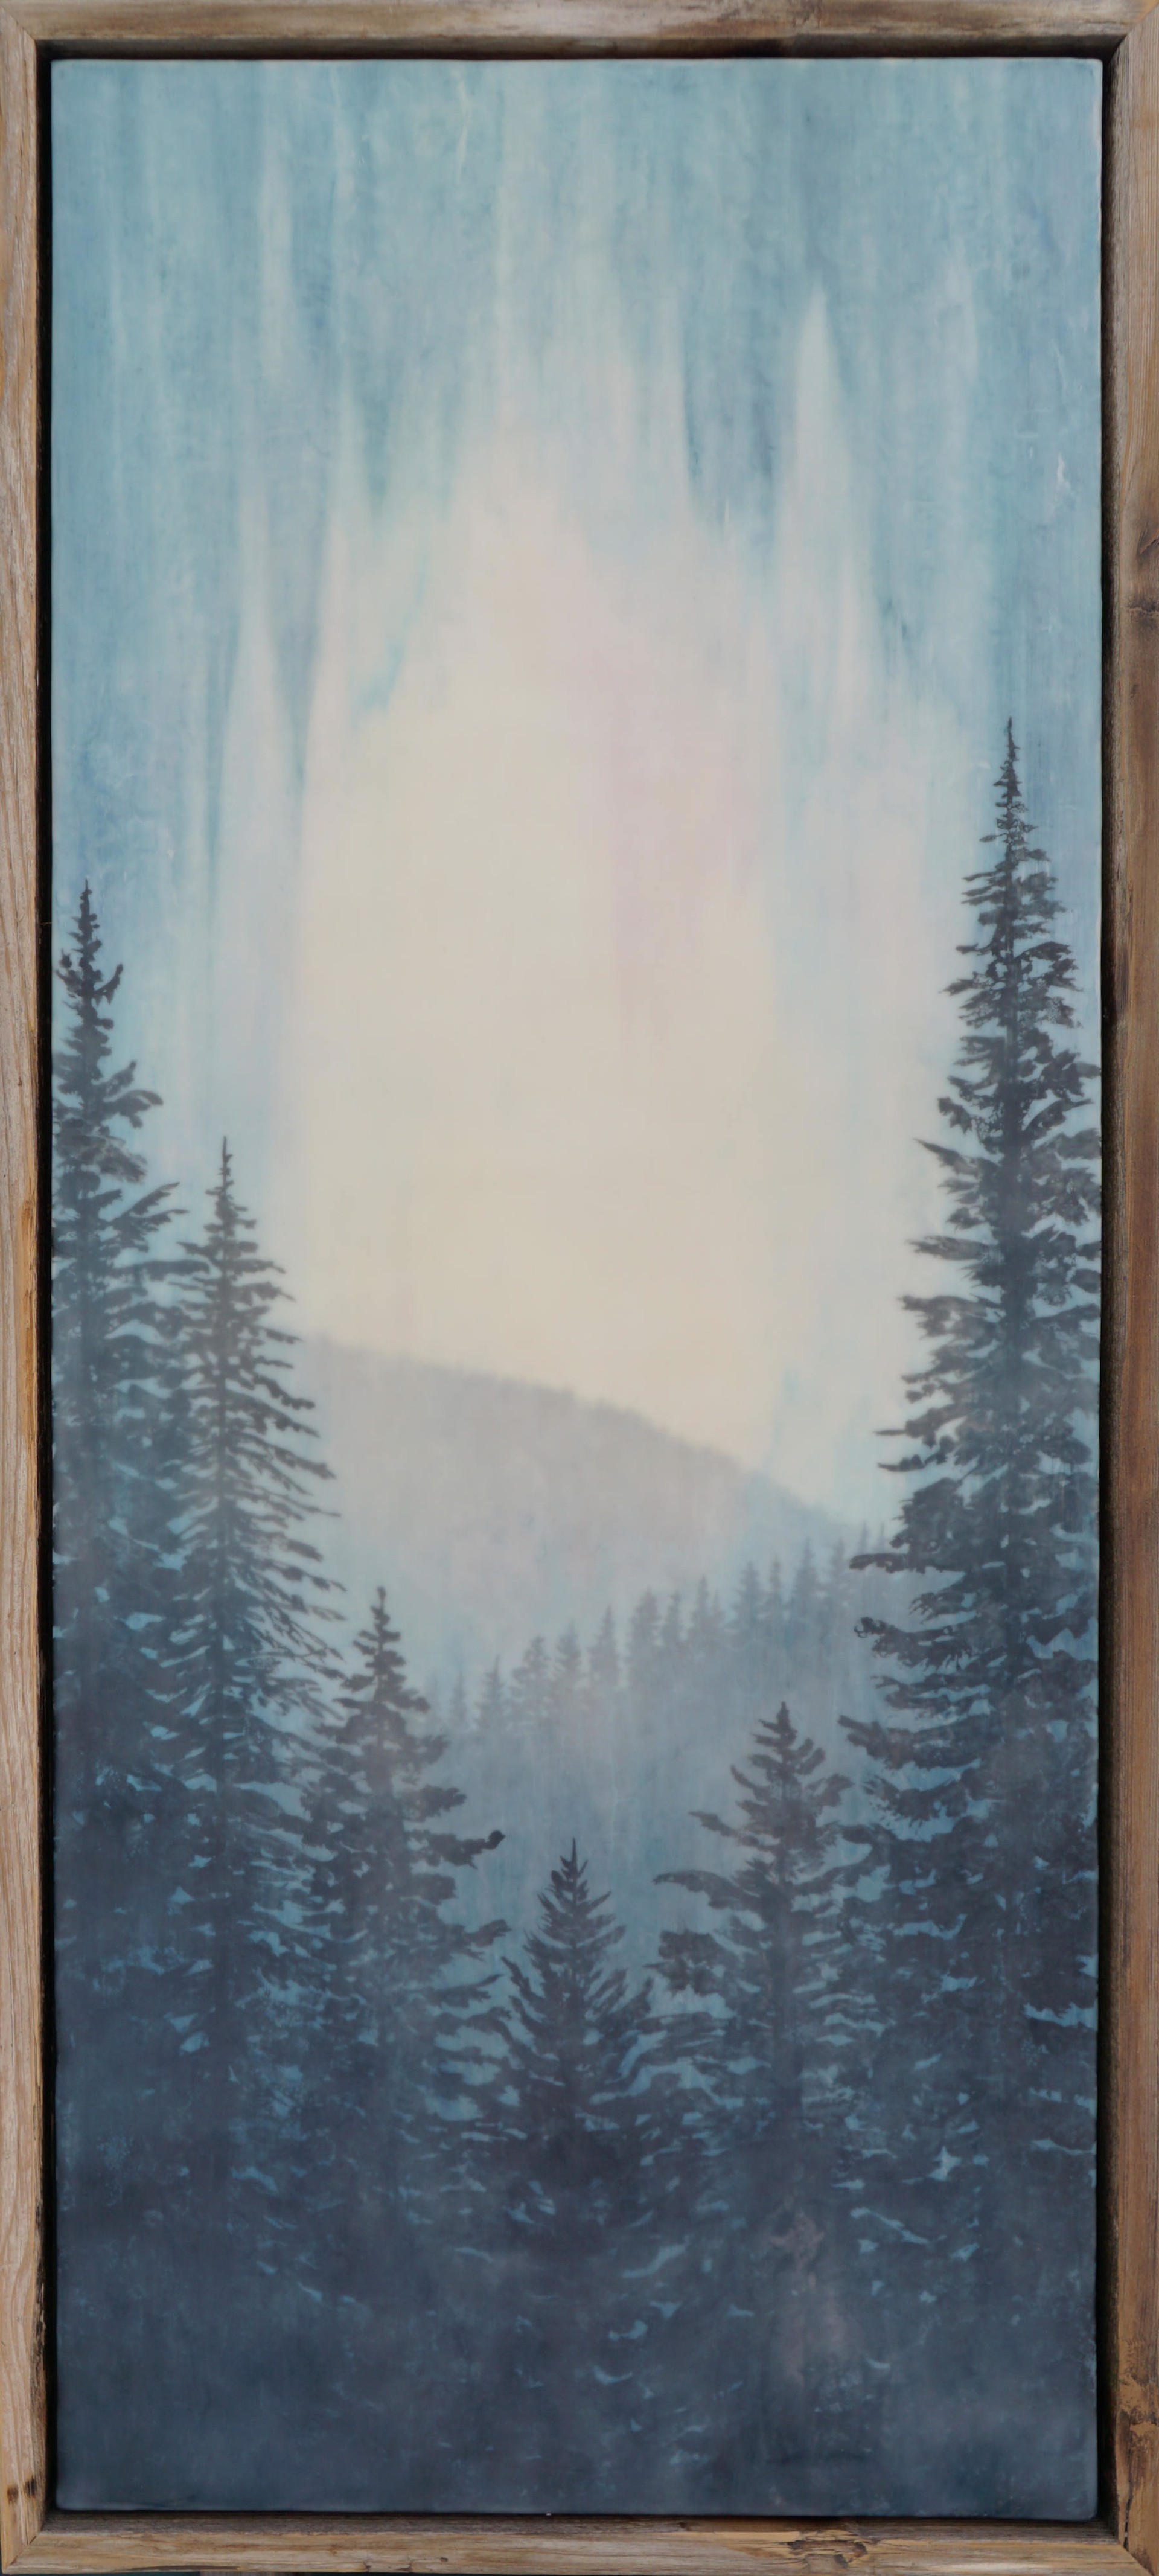 An Original Encaustic And Milk Paint Painting Of A Misty Treed Landscape With Blue Sky, Distant Hills And Layered Depth Of Trees, By Bridgette Meinhold